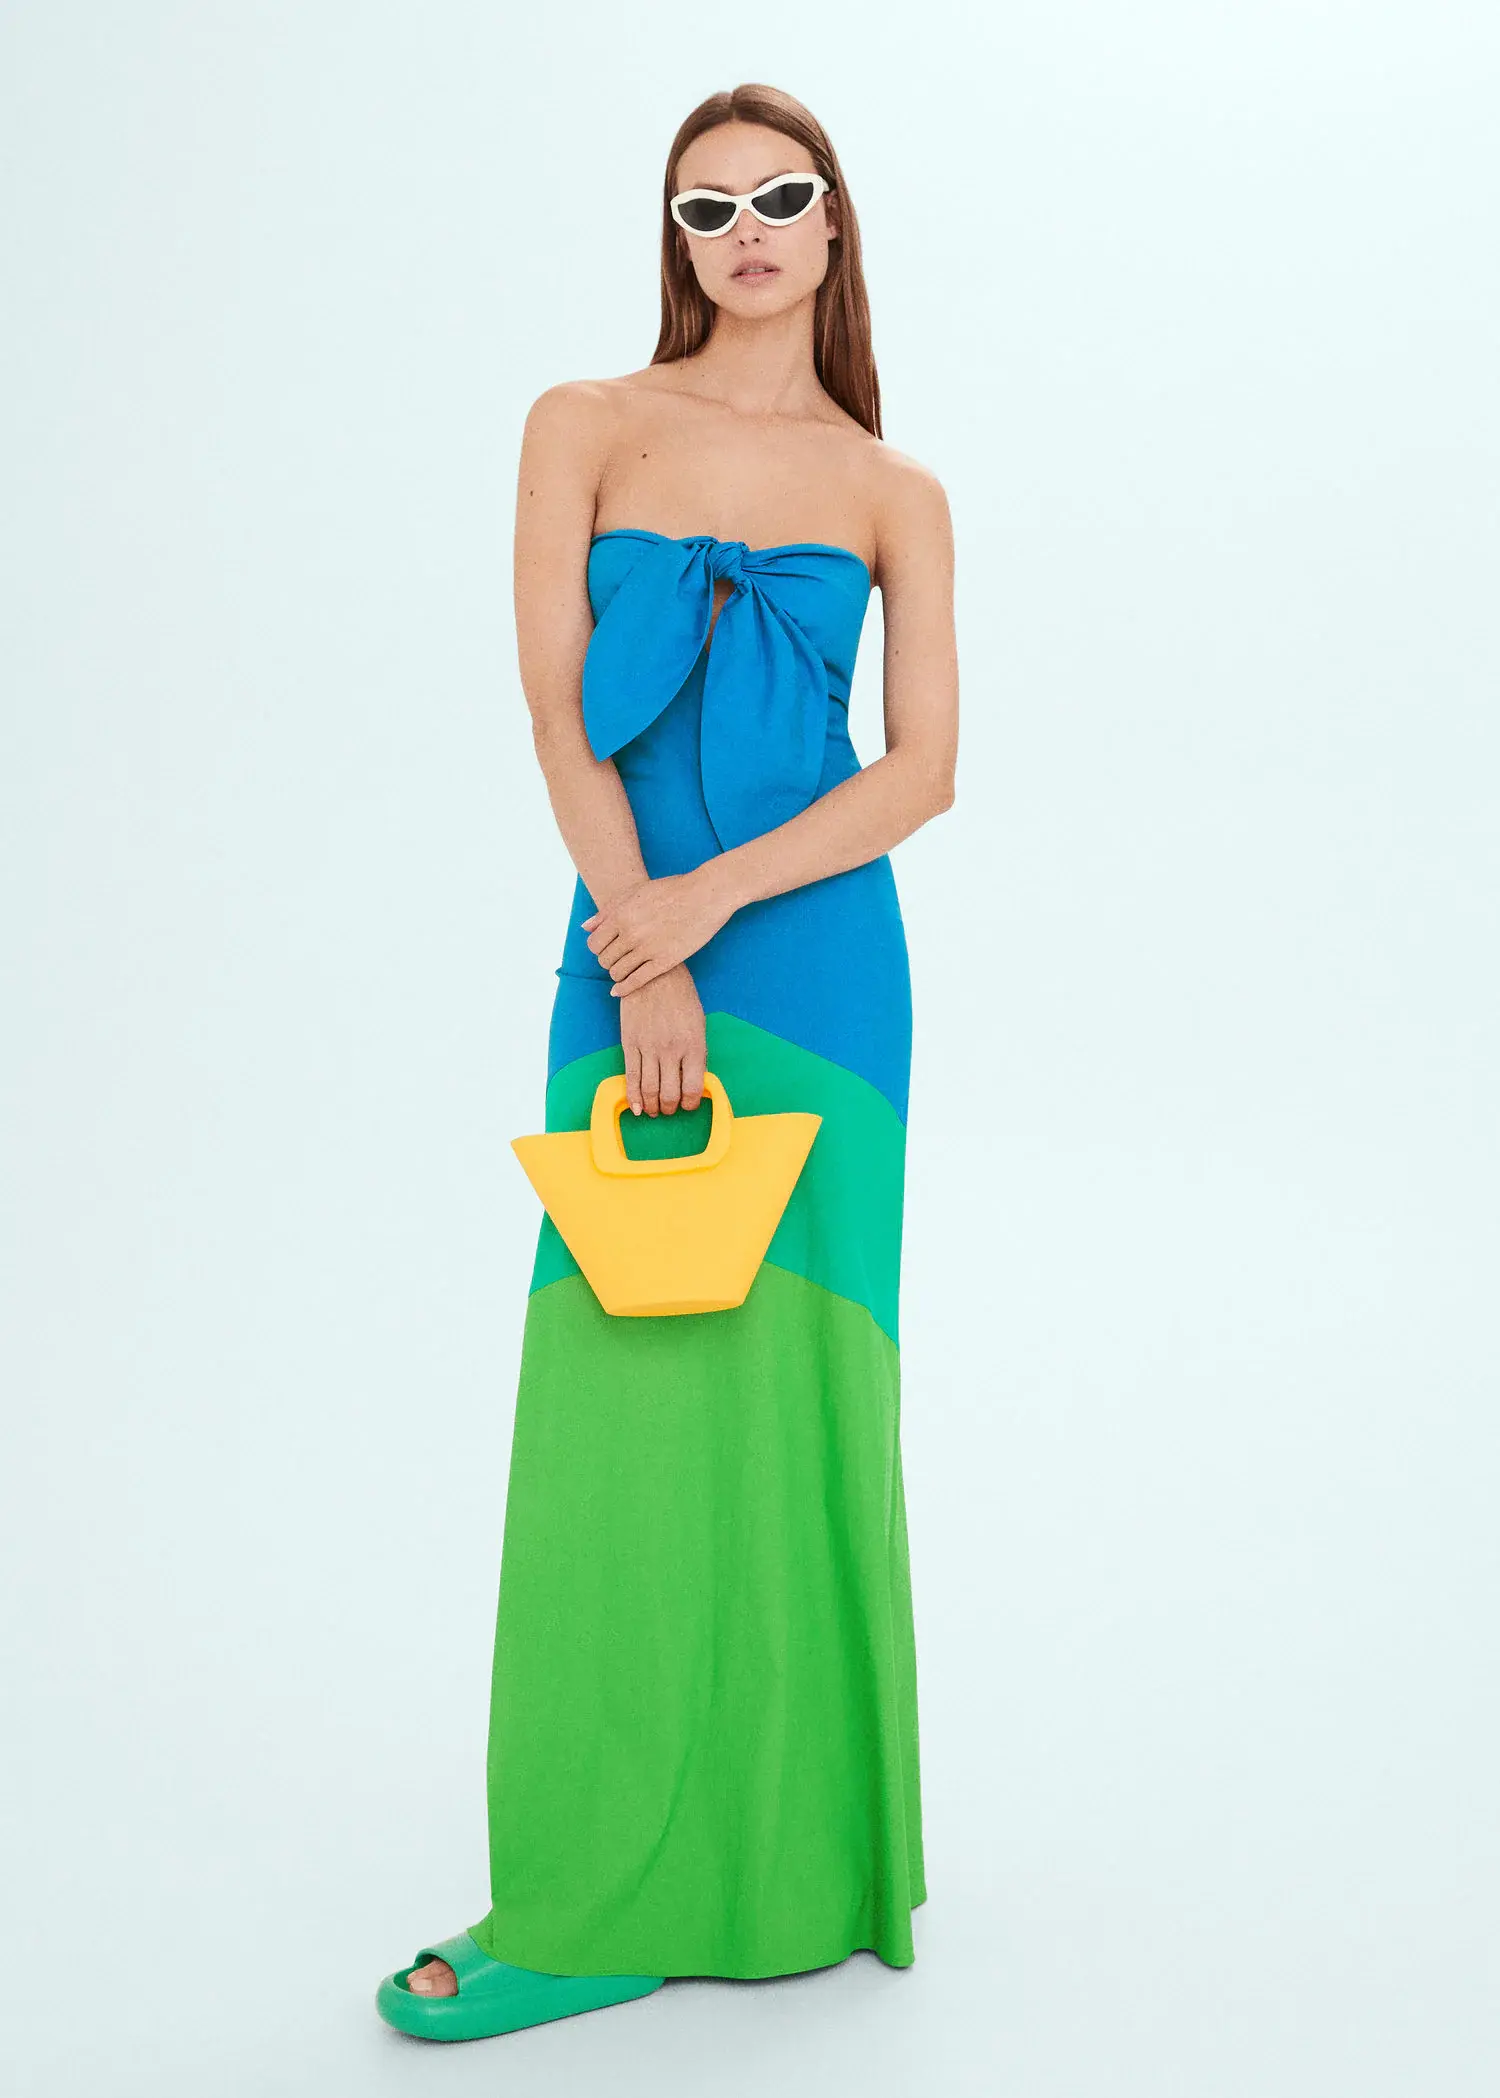 Mango Multi-colored dress with knot neckline. a woman in a blue and green dress holding a yellow purse. 